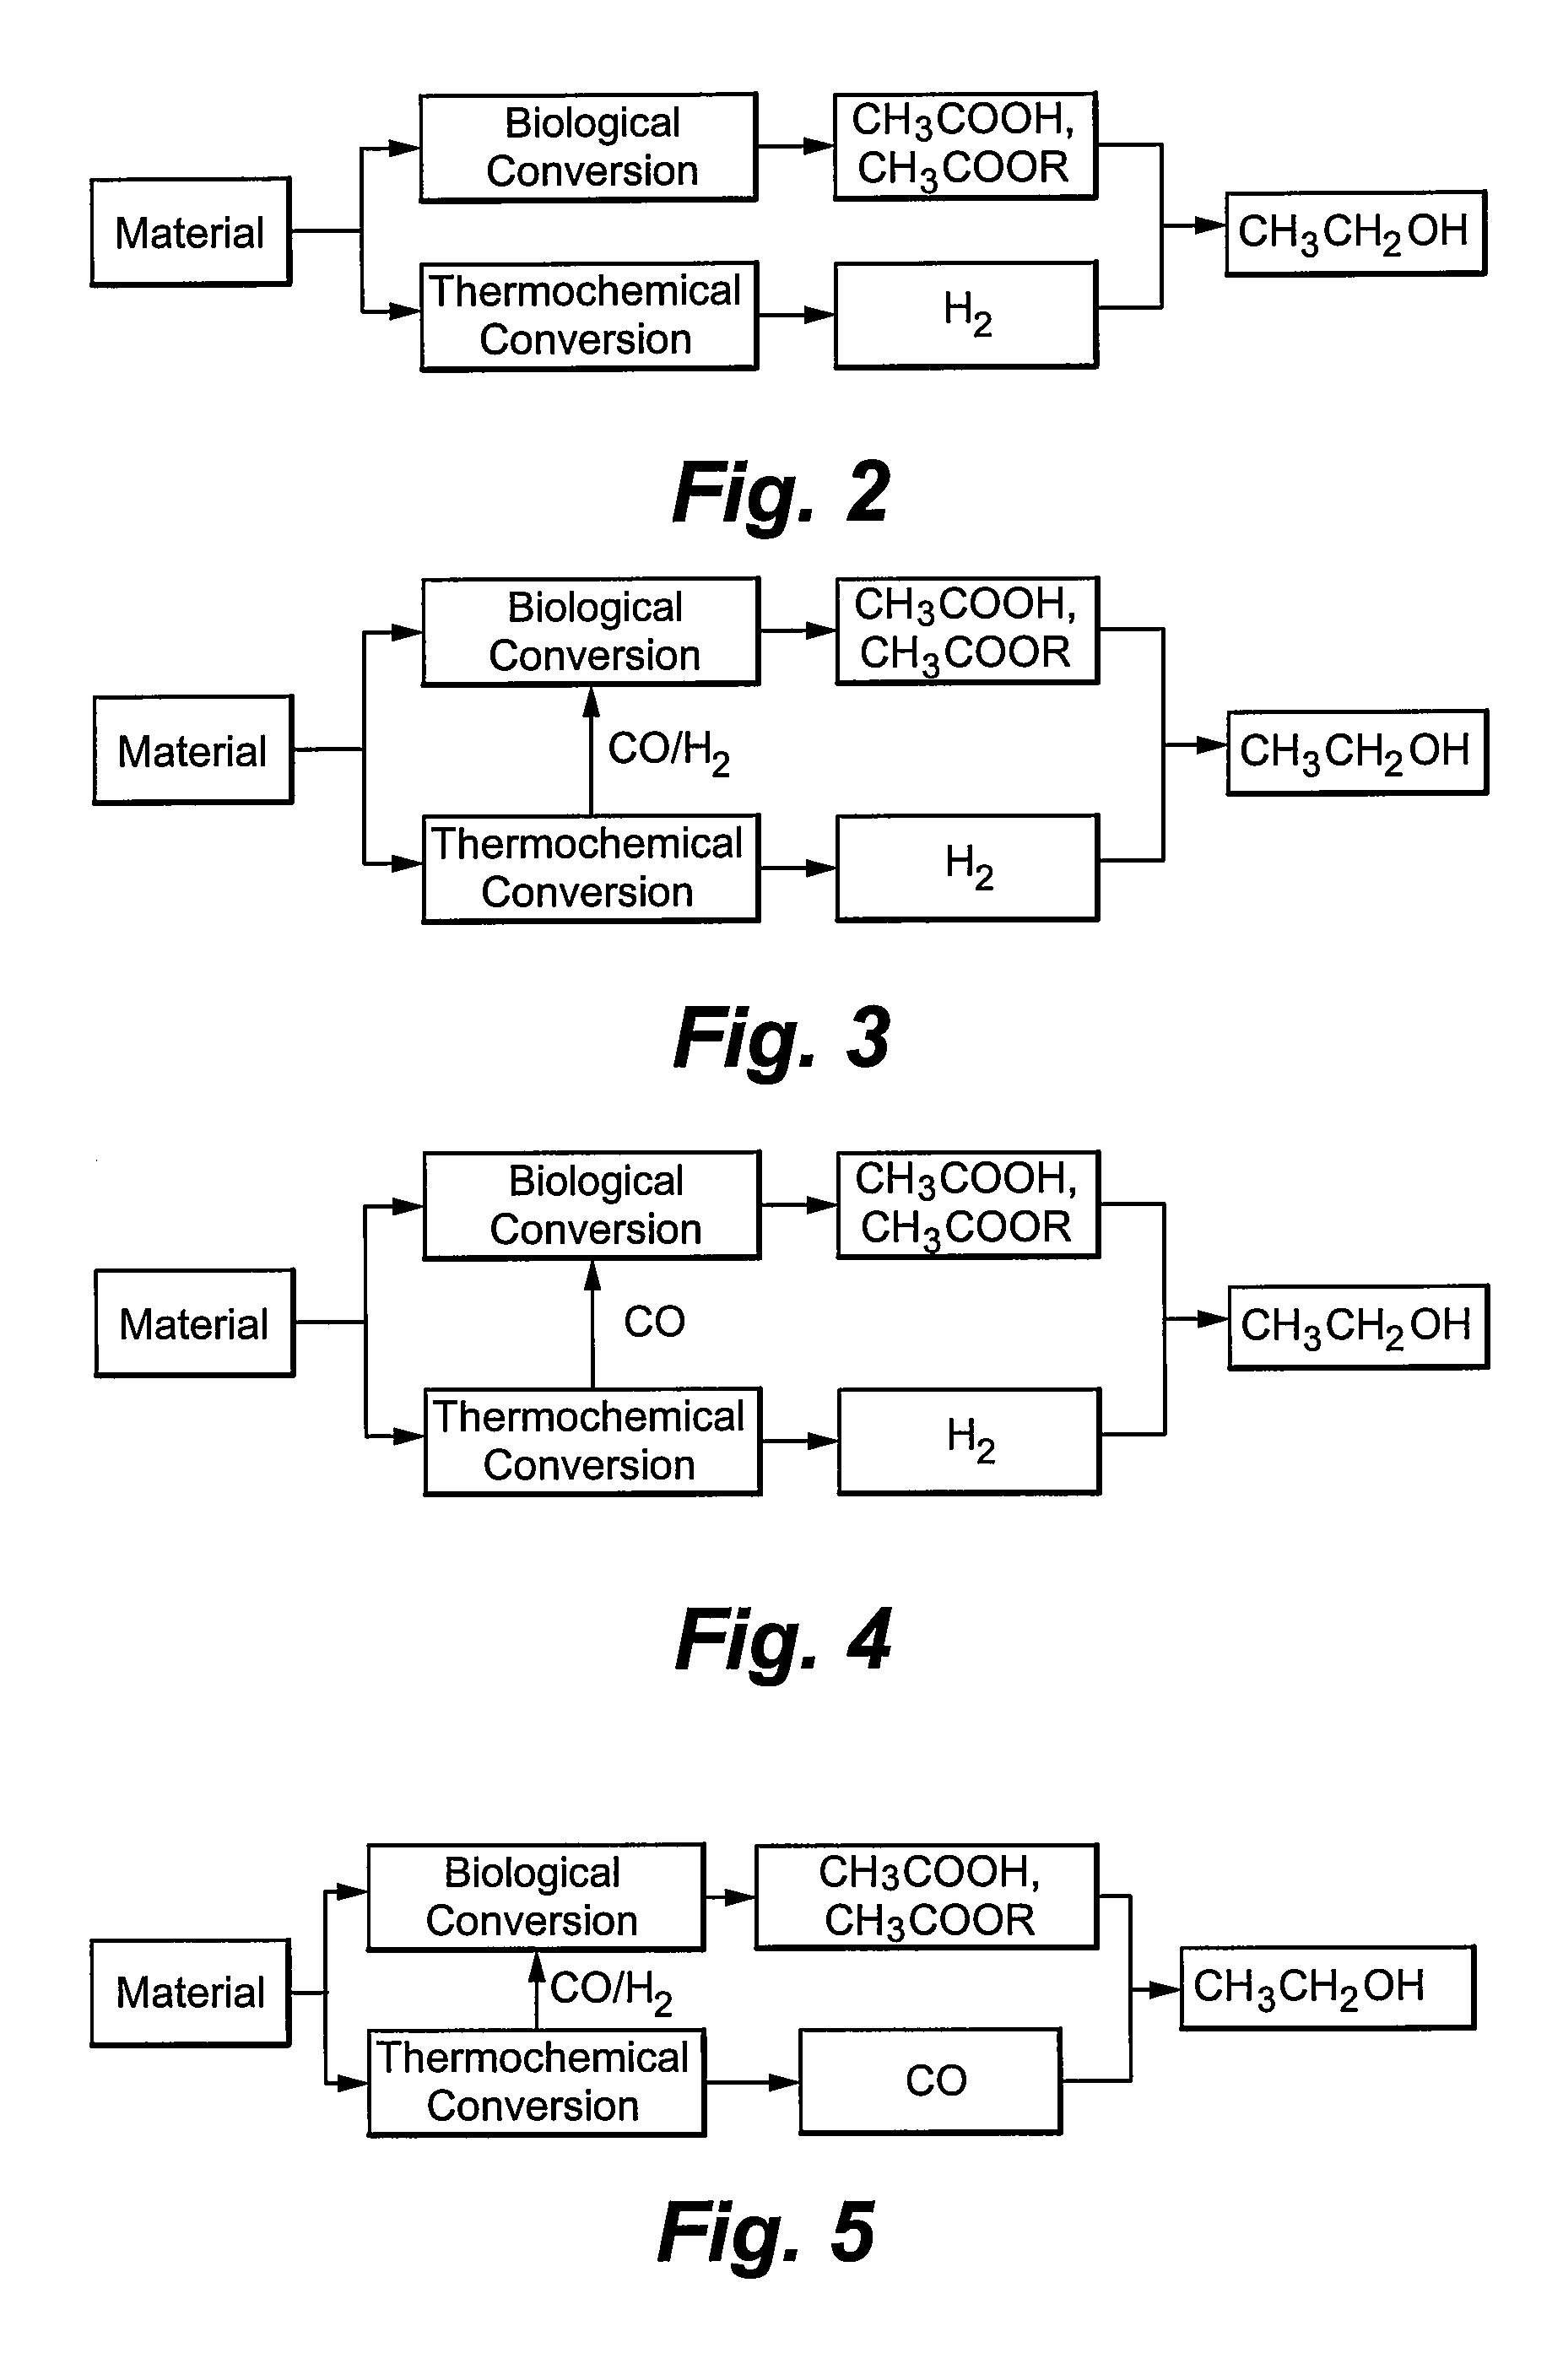 Method of making propanol and ethanol from plant material by biological conversion and gasification